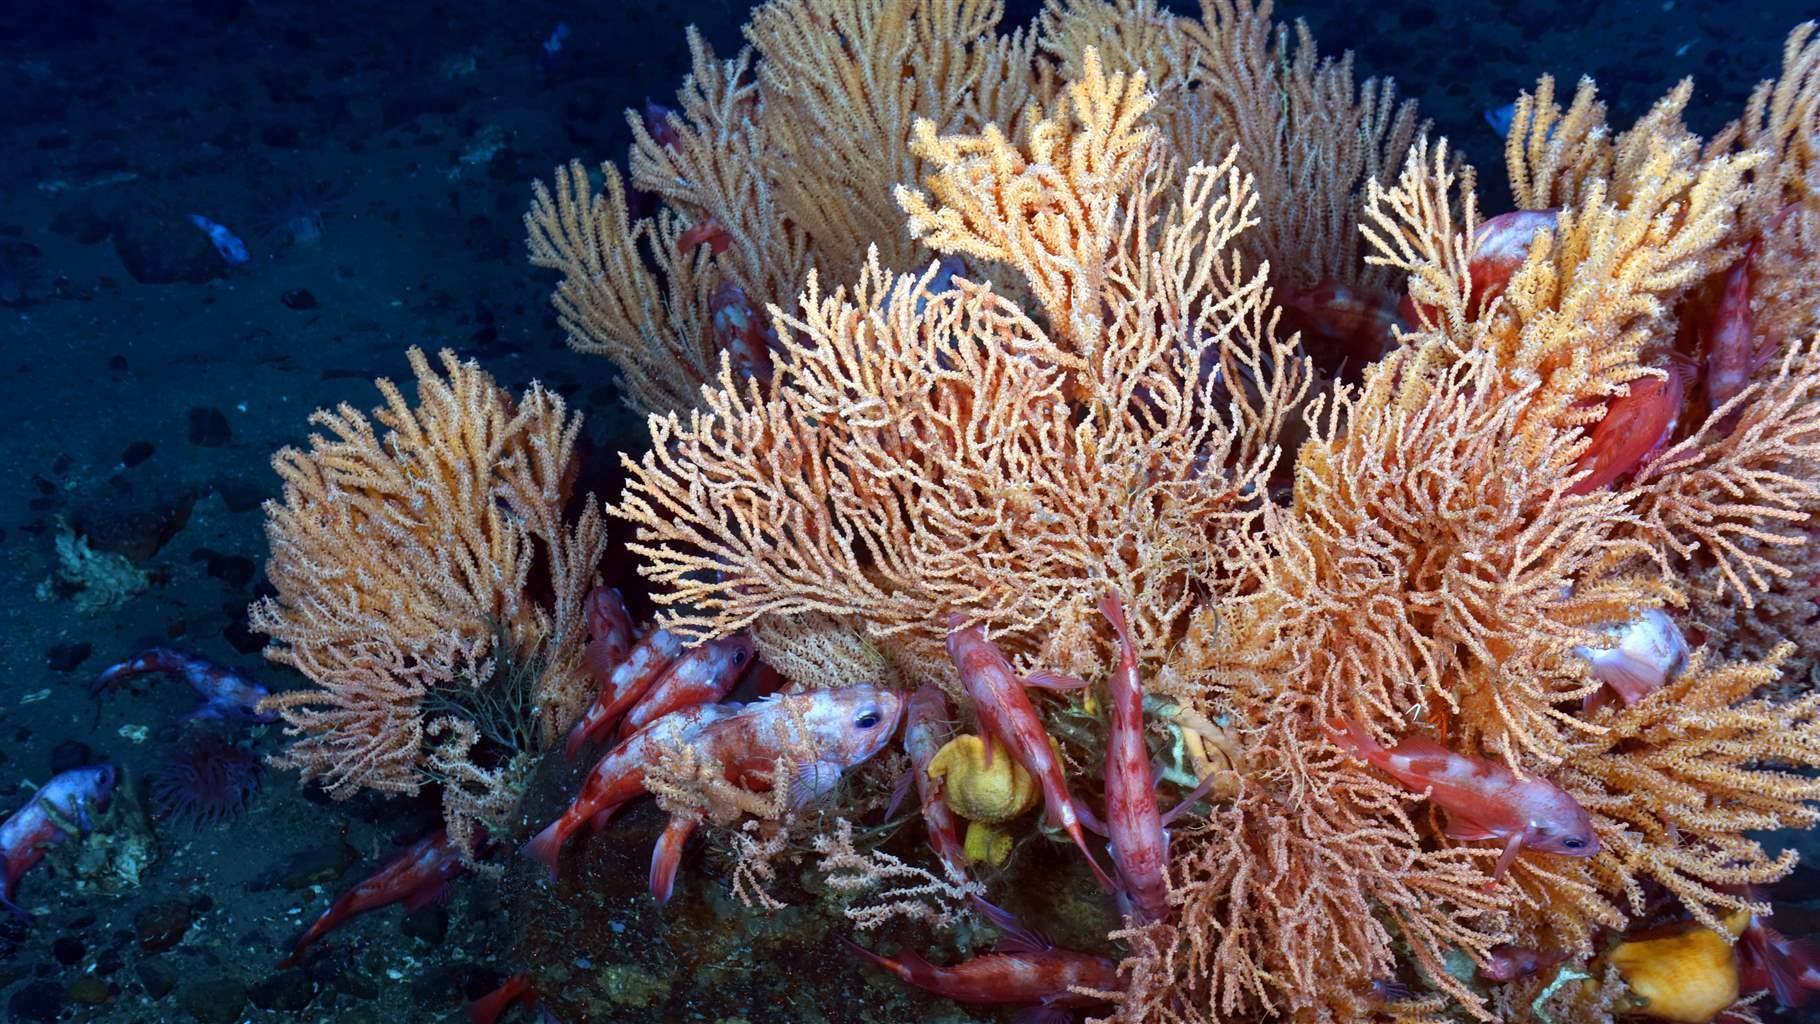 A gorgonian soft coral, known as seacorn coral (Primnoa resedaeformis), and redfish showcase the biodiversity within the Eastern Canyons Marine Refuge